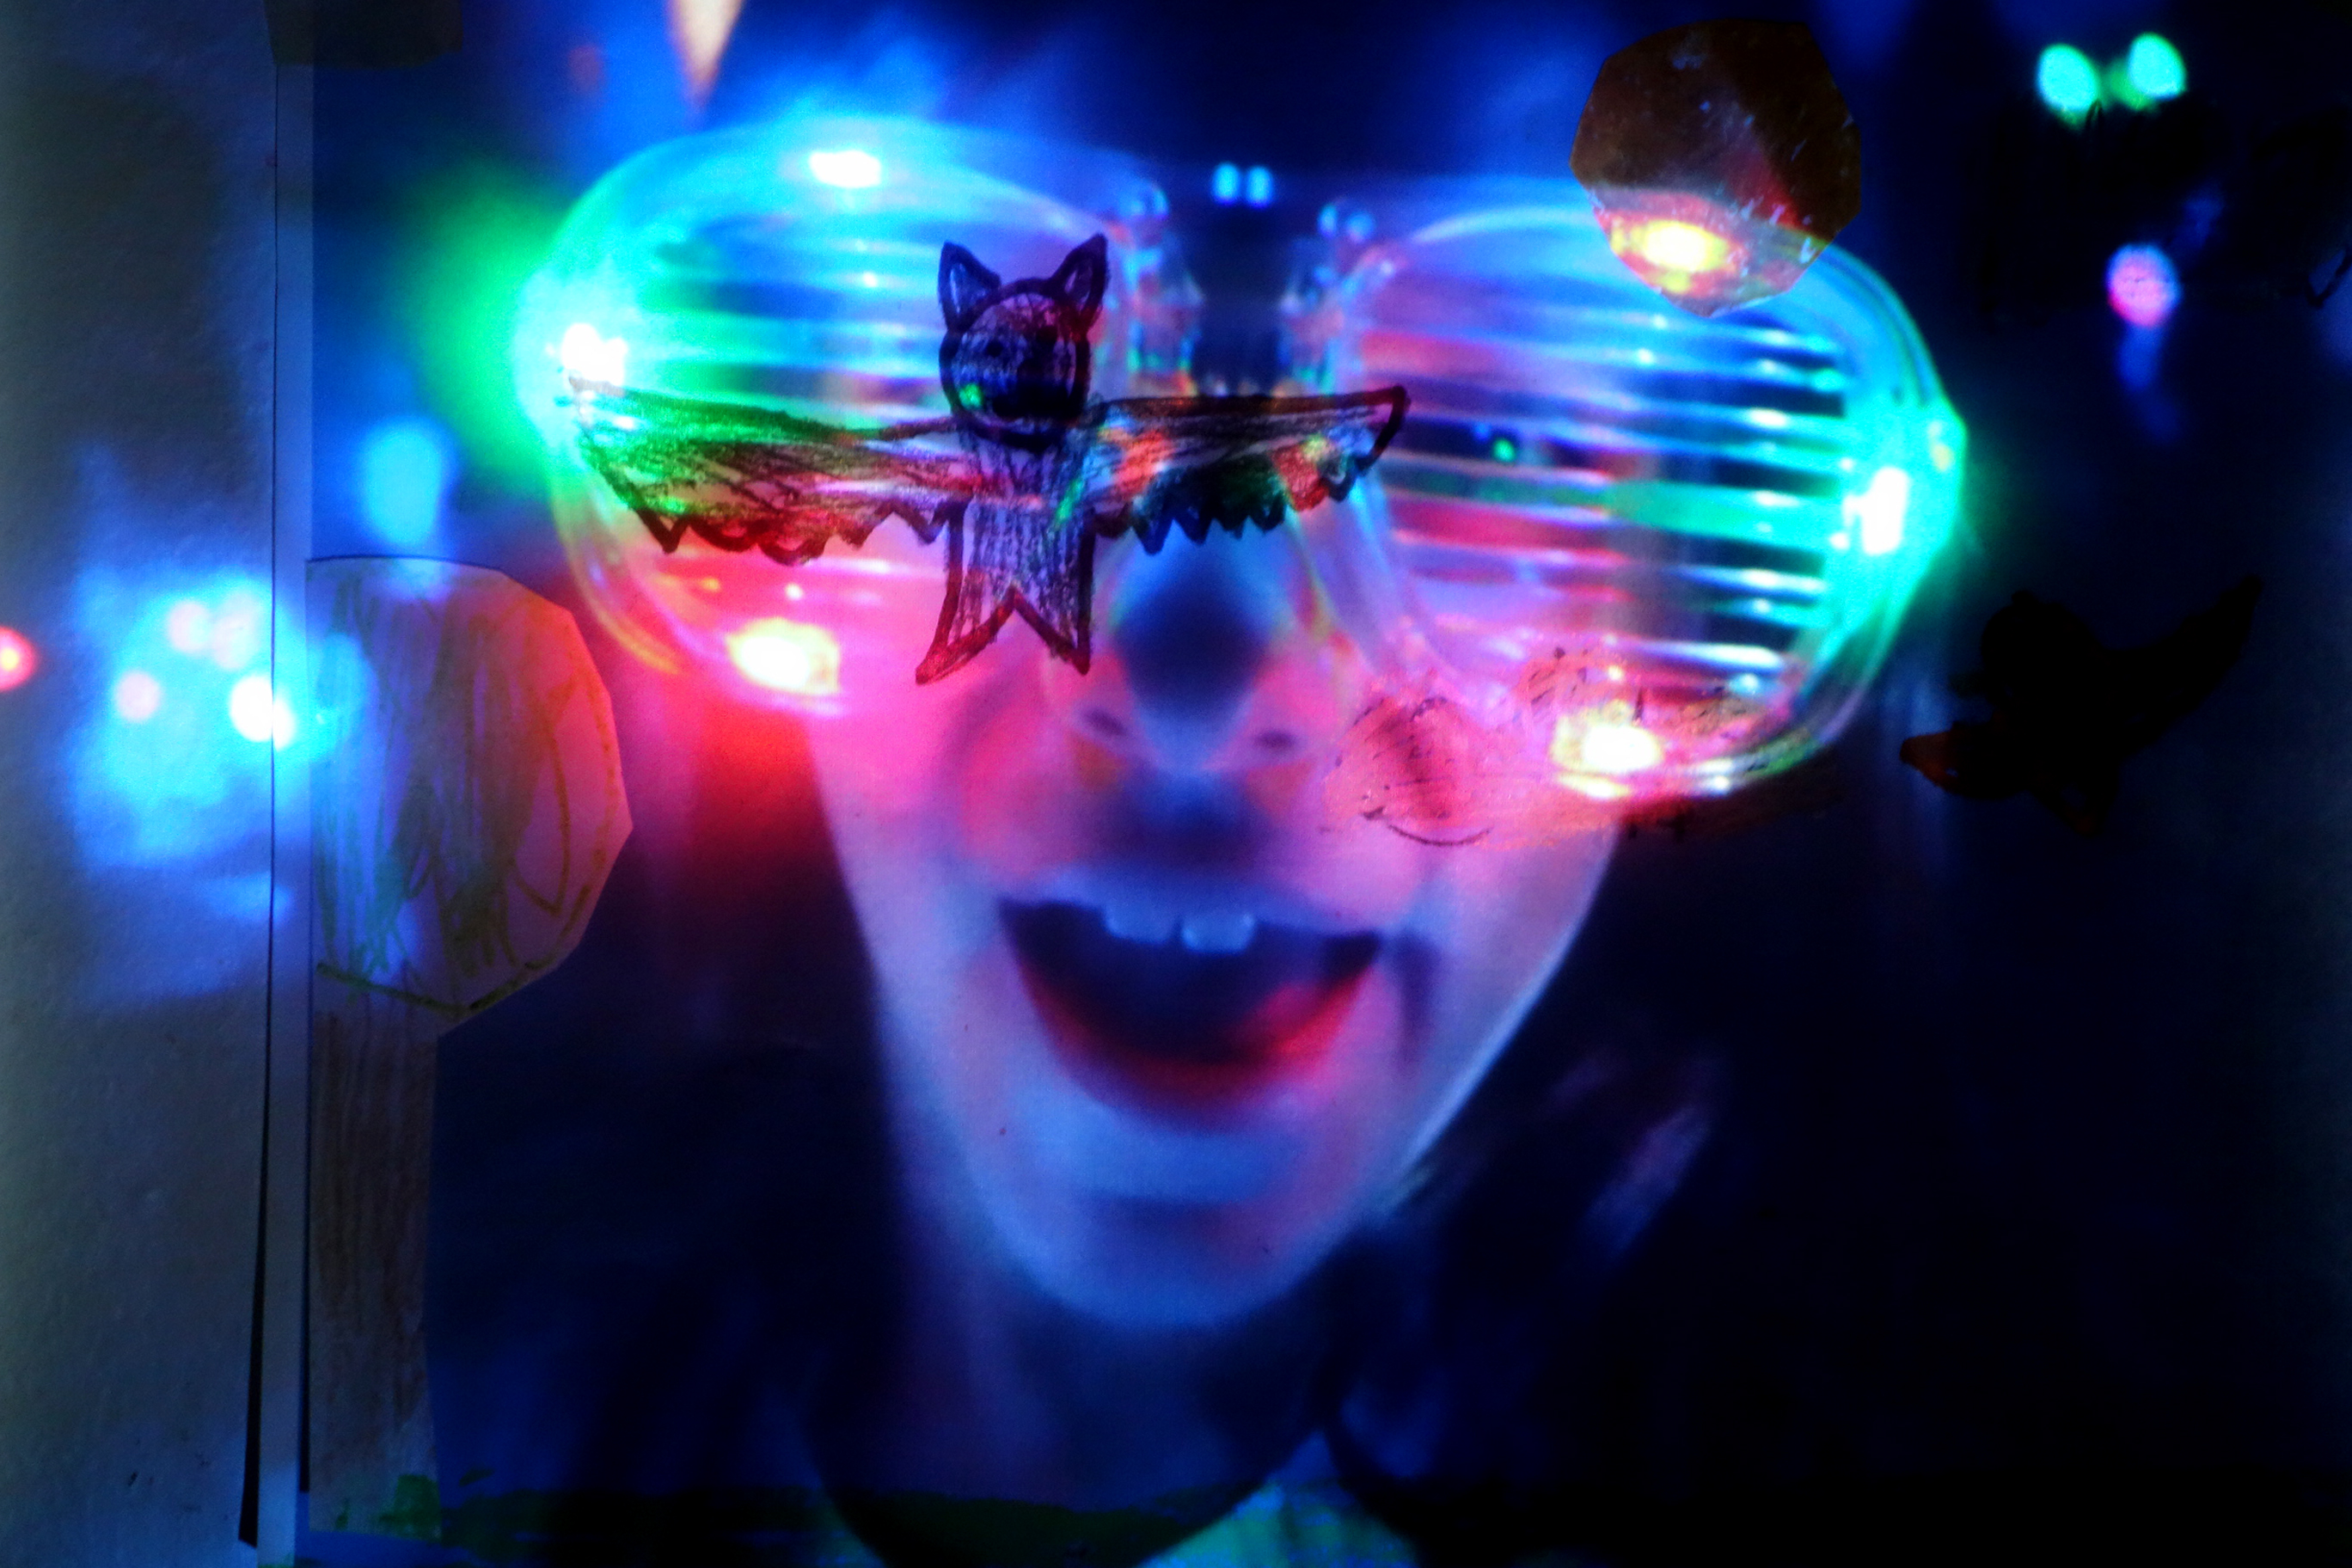 A child wearing light-up plastic glasses